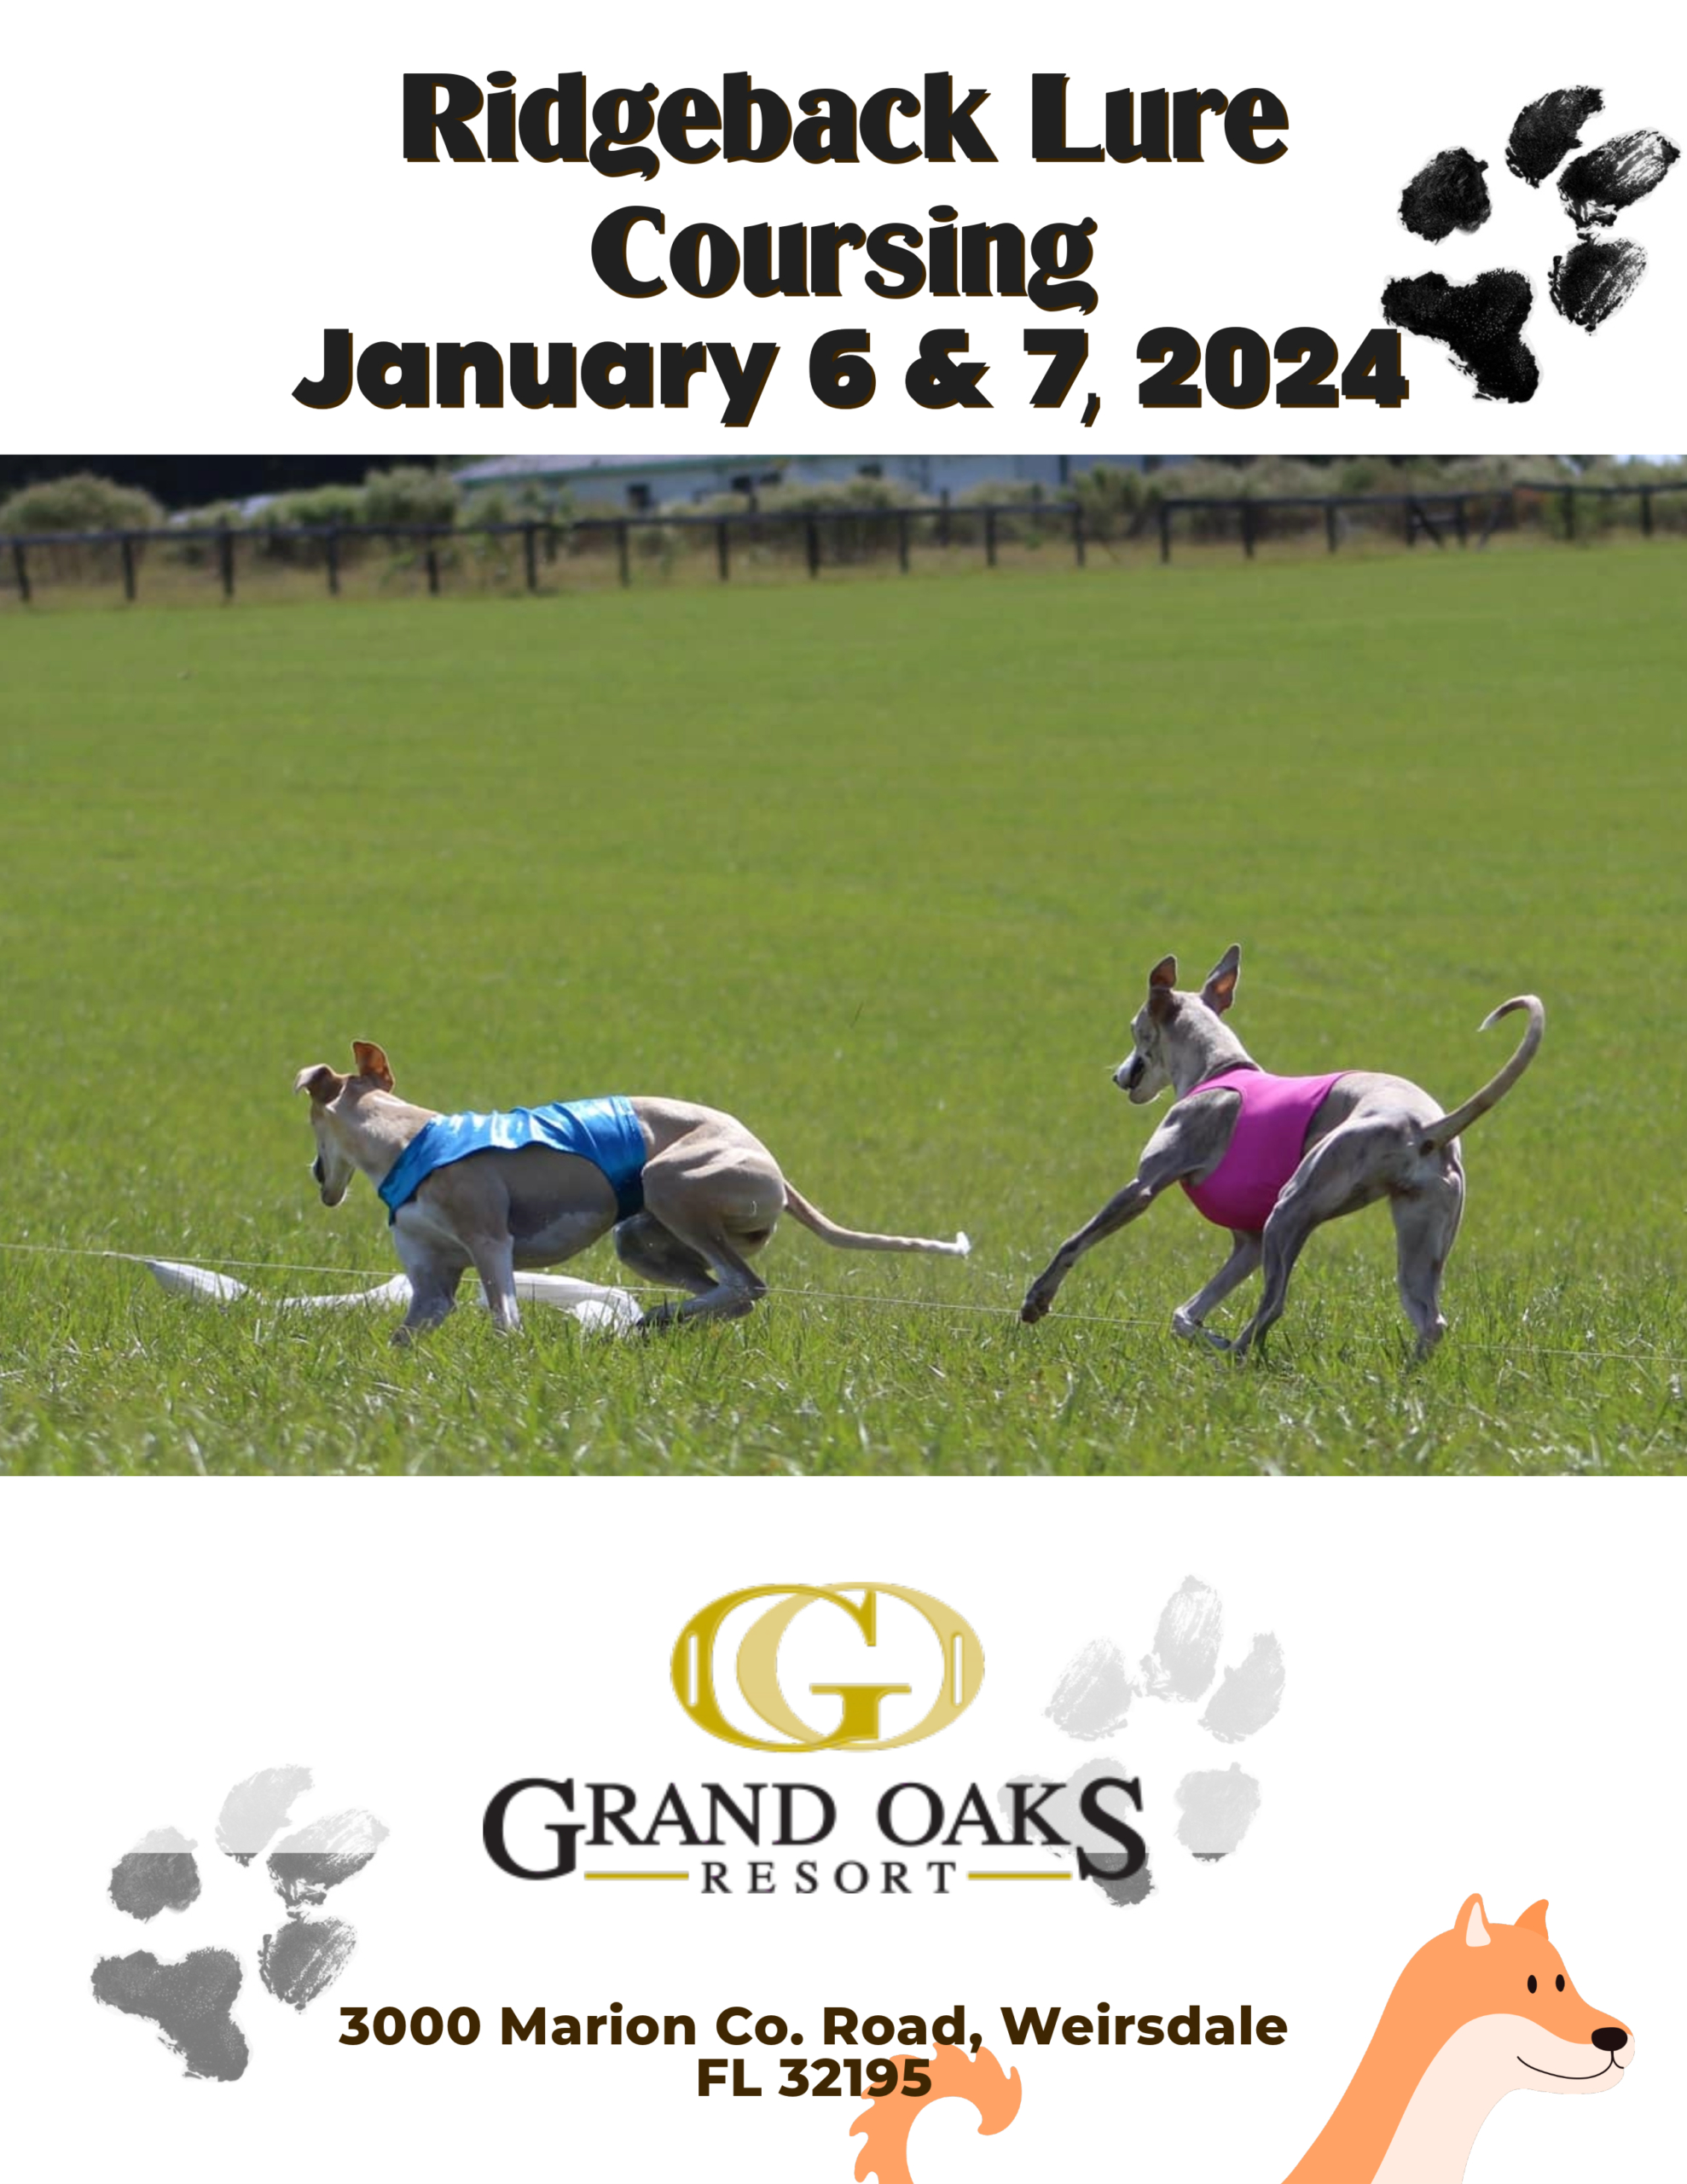 Lure coursing at the Grand oaks Resort